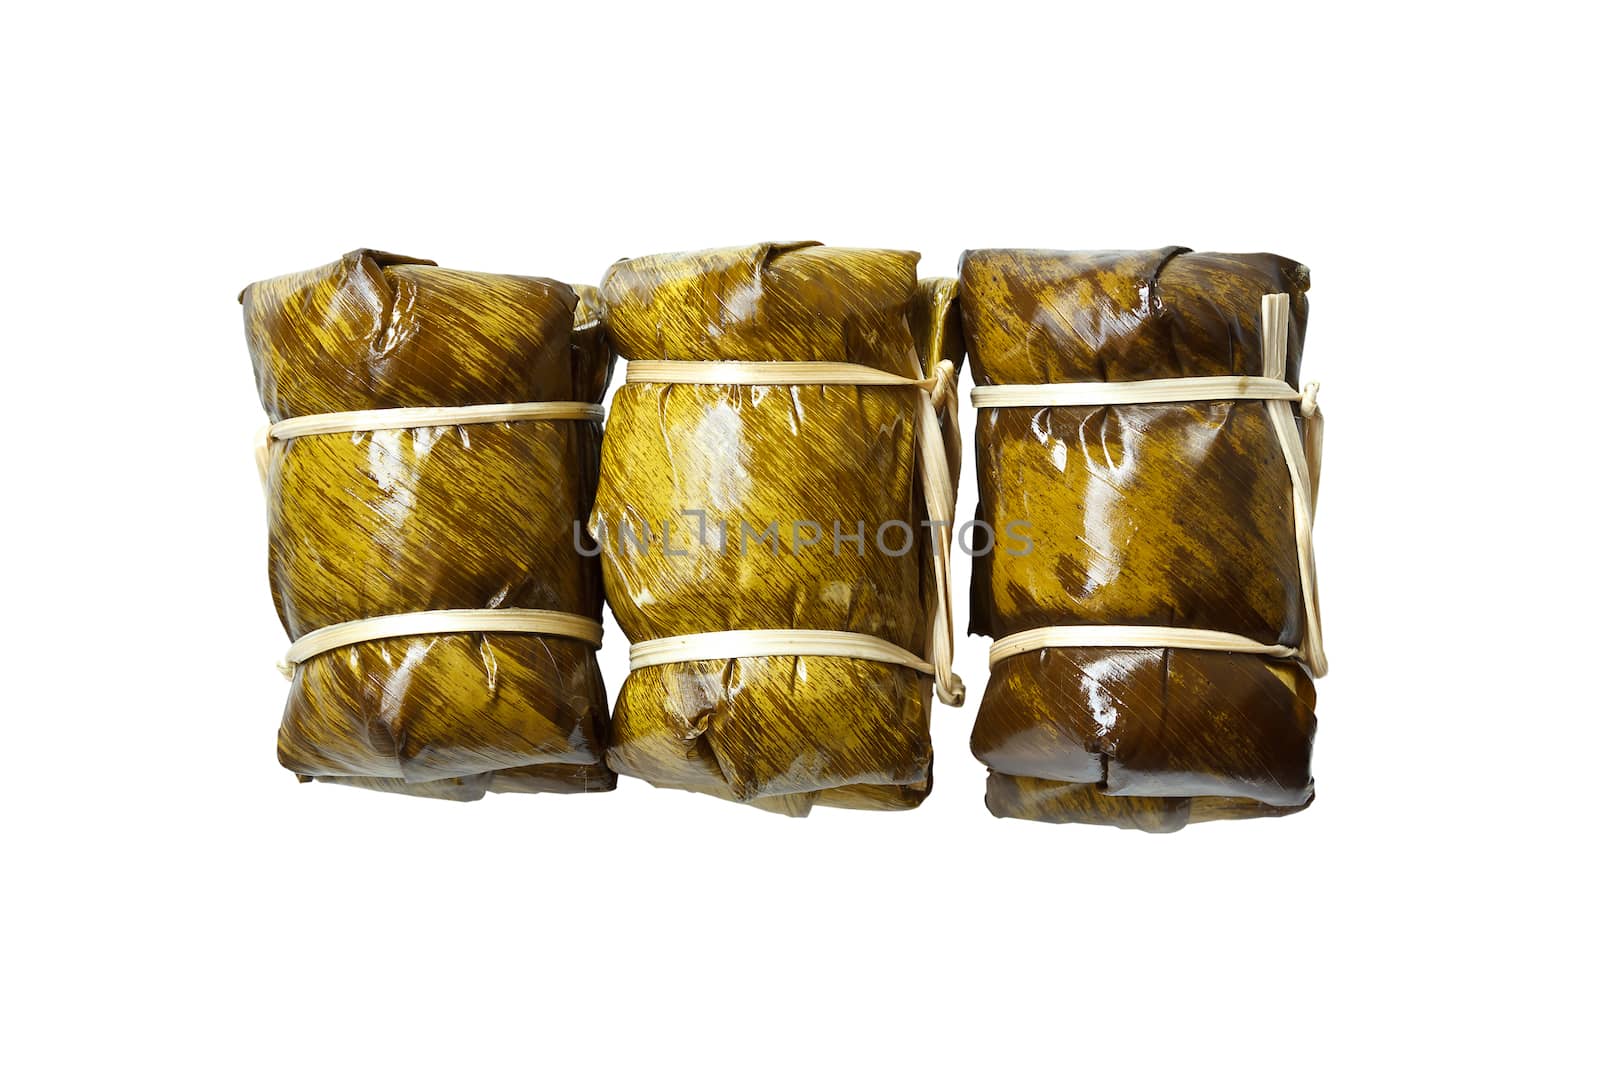 Thai dessert sticky rice with banana isolated on white